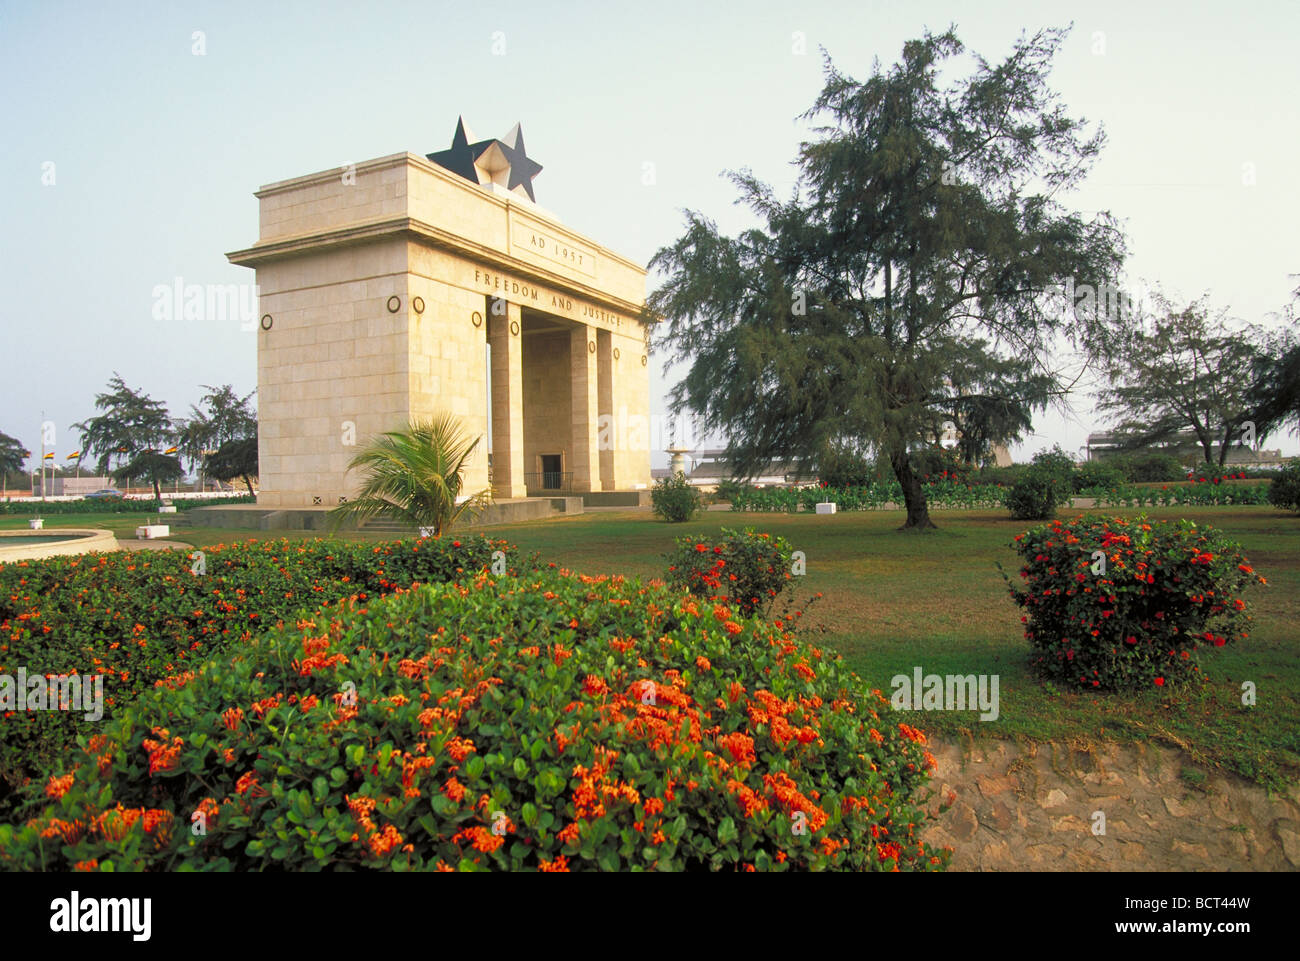 Elk151 1064 Ghana Accra Independence Arch Stock Photo